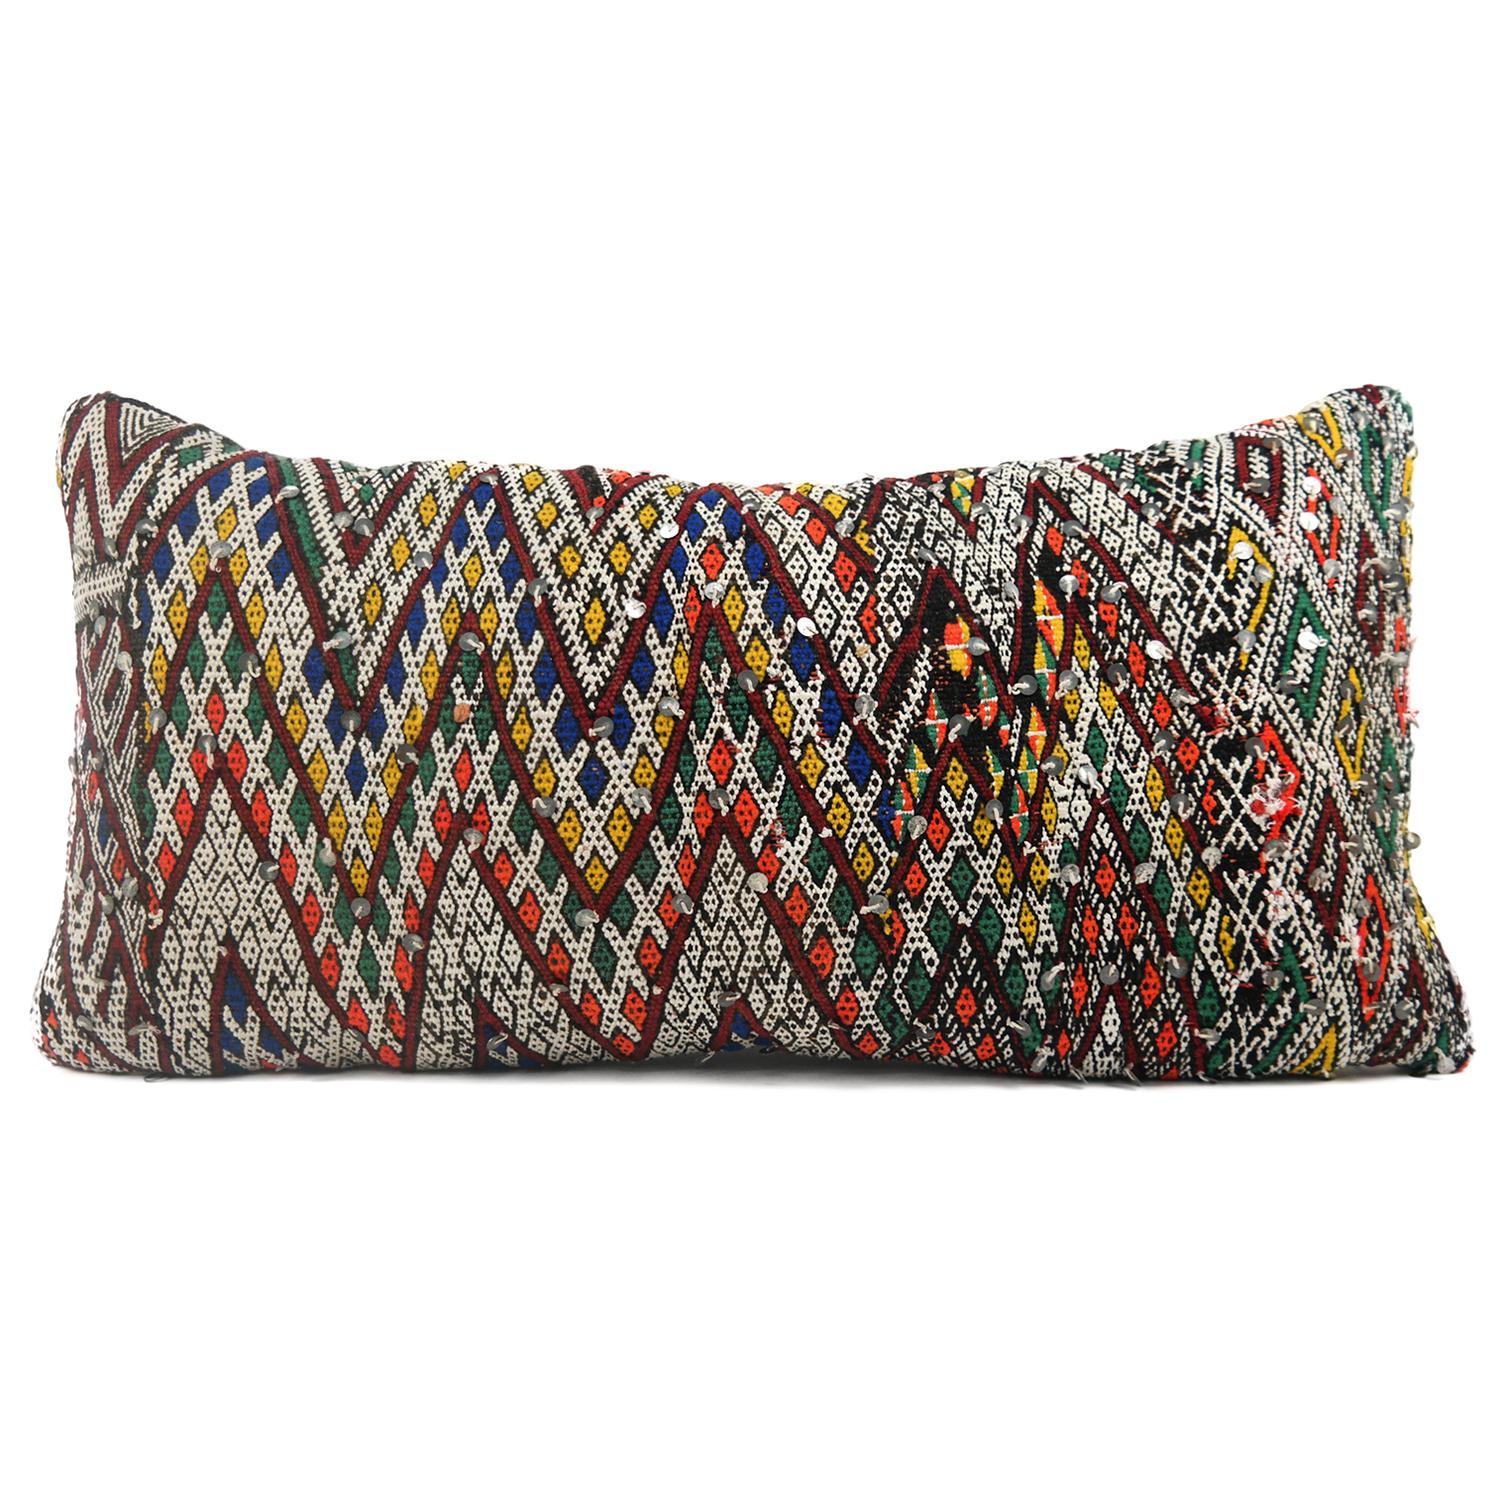 A stunning extra large bohemian Moroccan kilim cushion custom made in Morocco. Cut from a circa 40 years old hand loomed kilim rug, from the Middle Atlas Mountains. We have searched and selected the rug ourselves. The pillow has beautiful colors